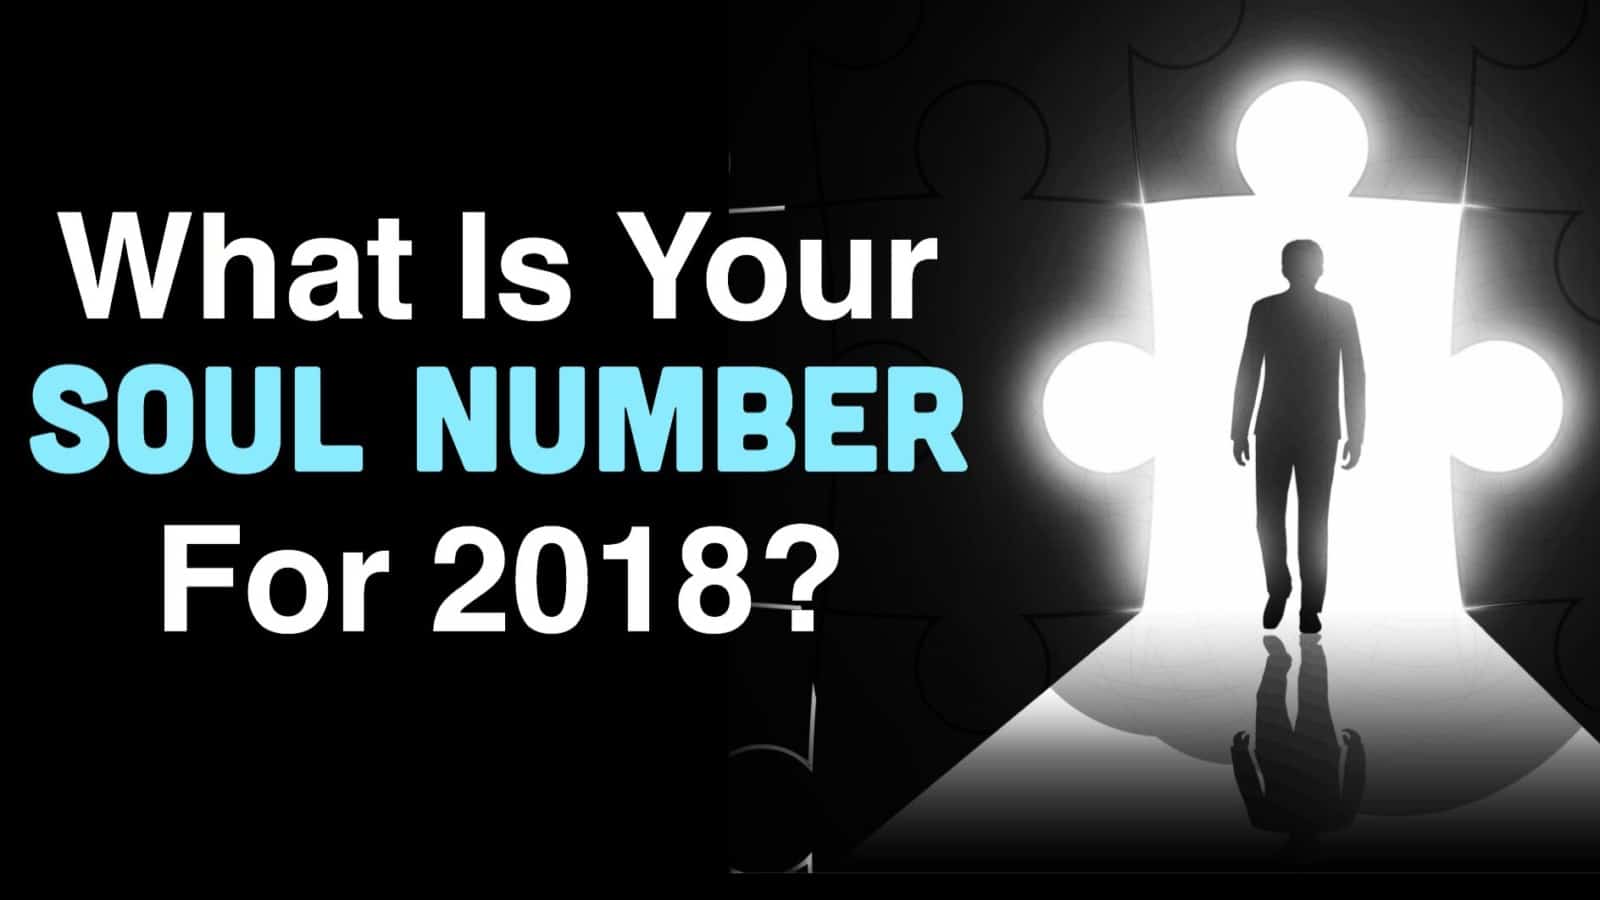 What Is Your Soul Number For 2018?